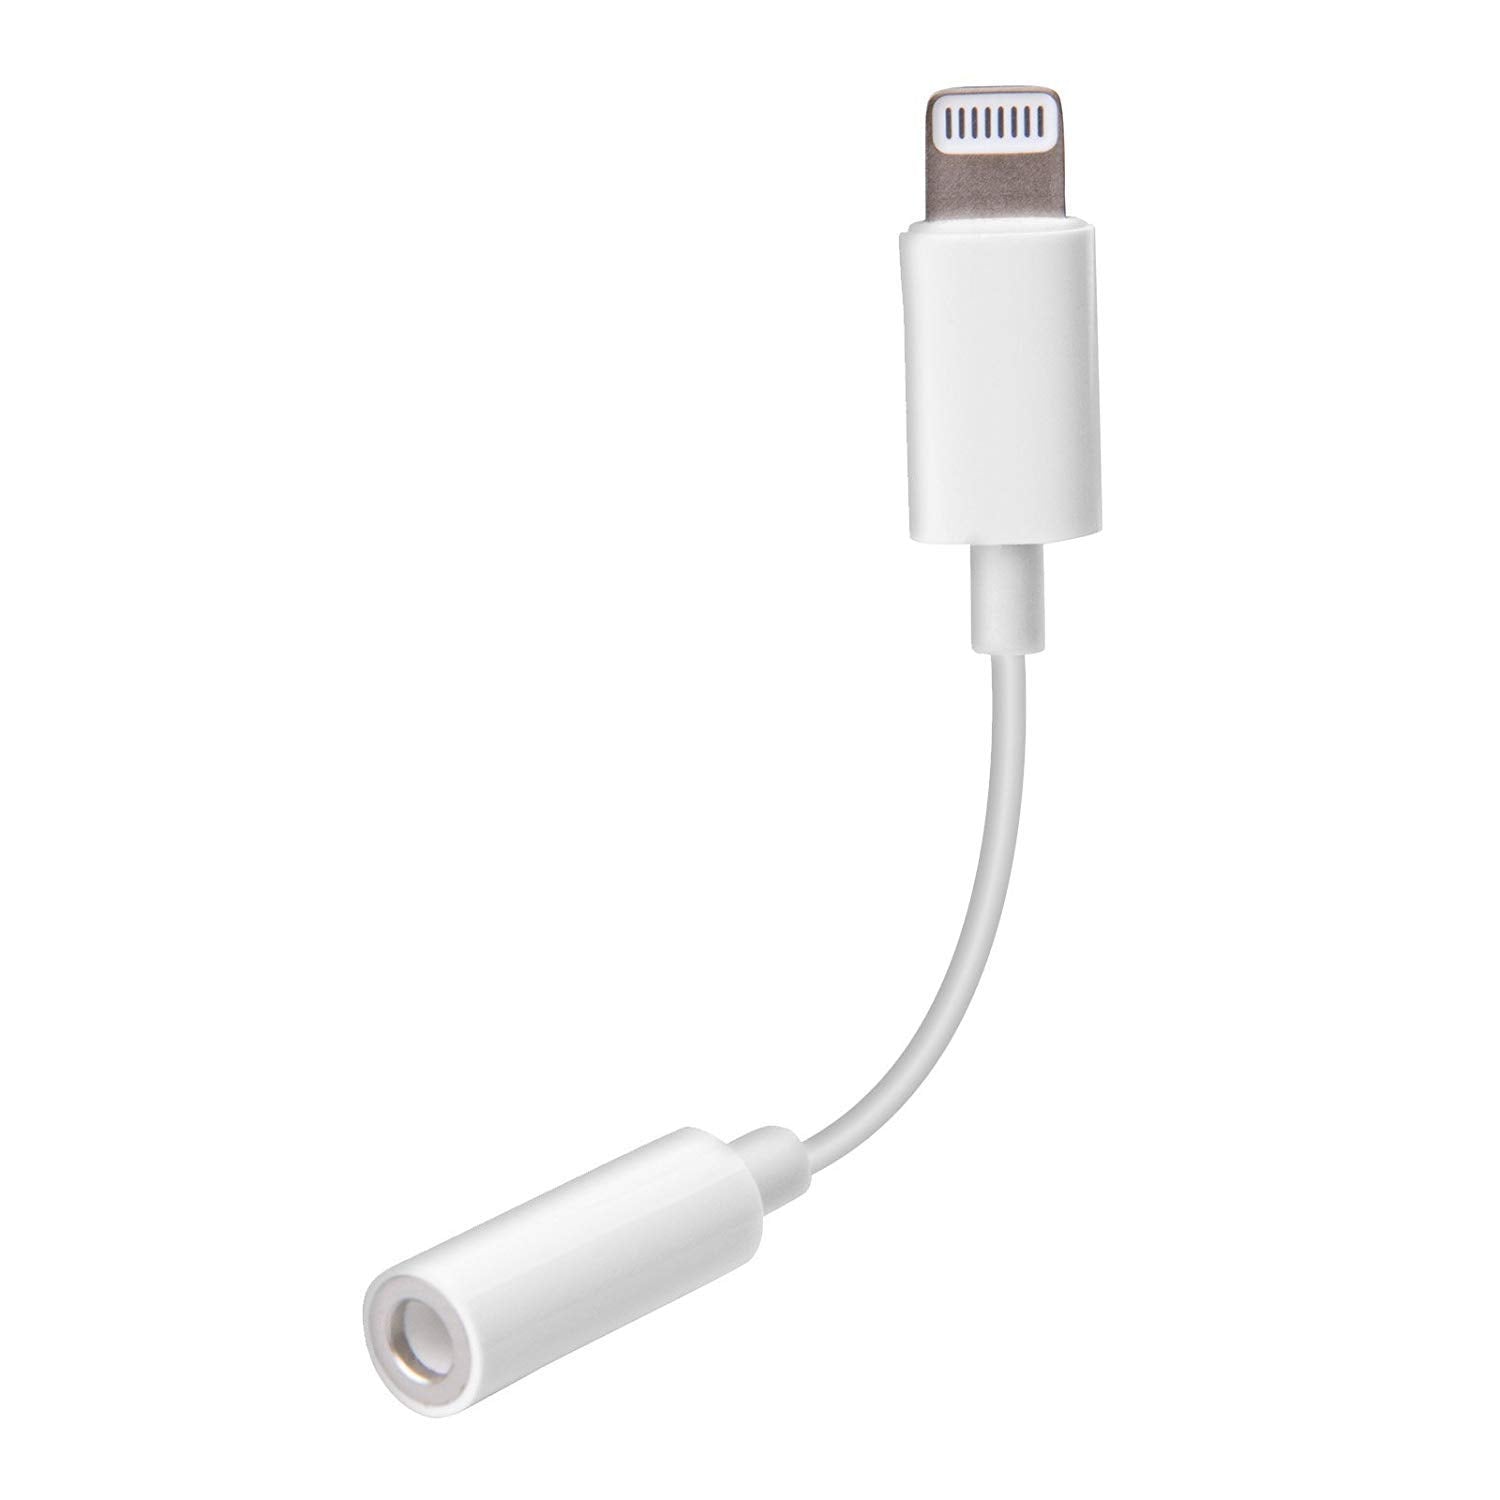 Apple iPhone 8 Heaphone Jack Connector (Lightning to 3.5mm)